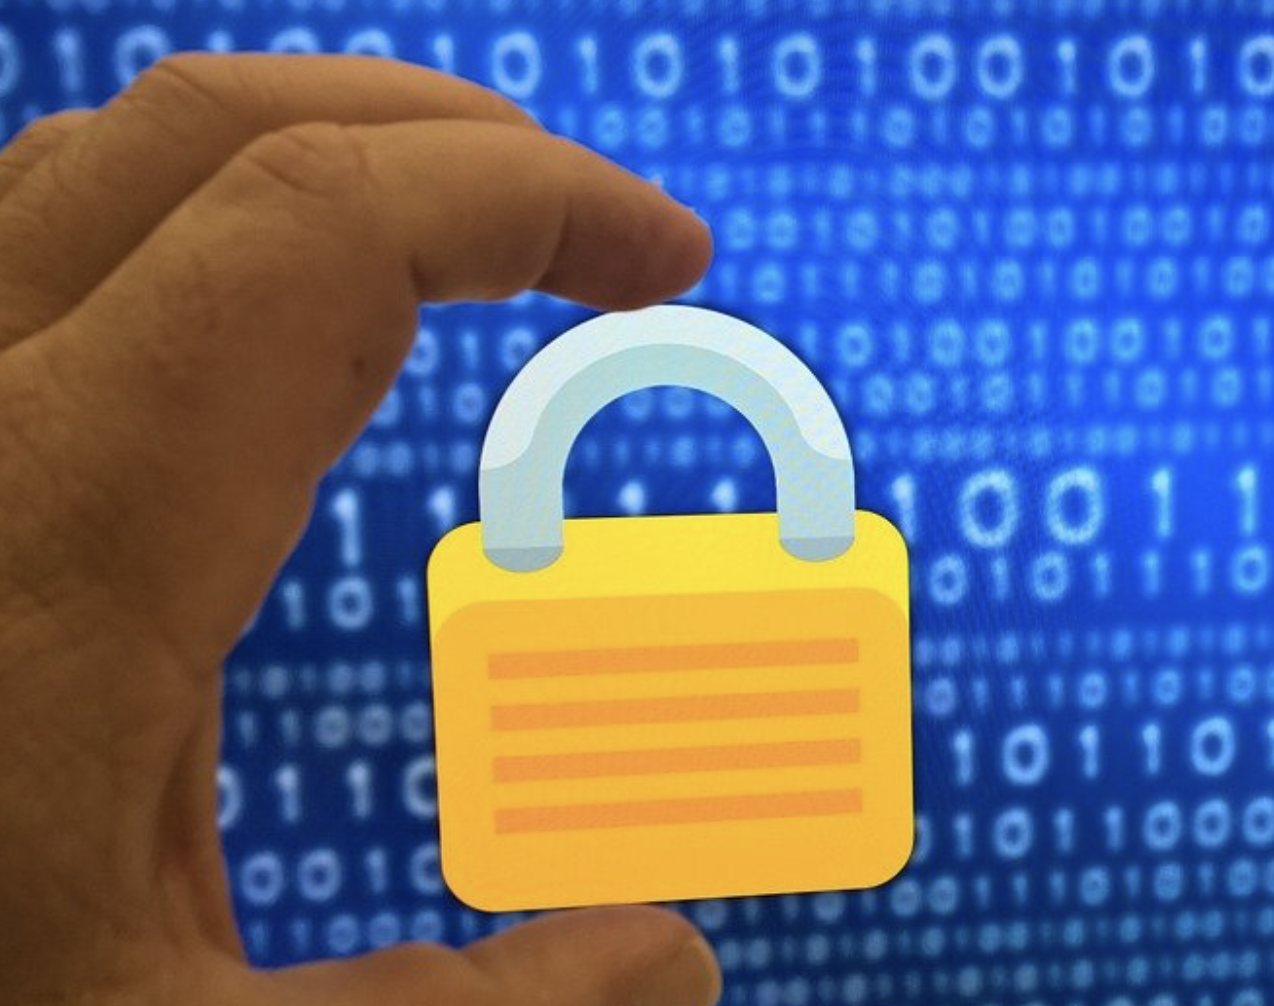 Why top-quality IT security is crucial for your business